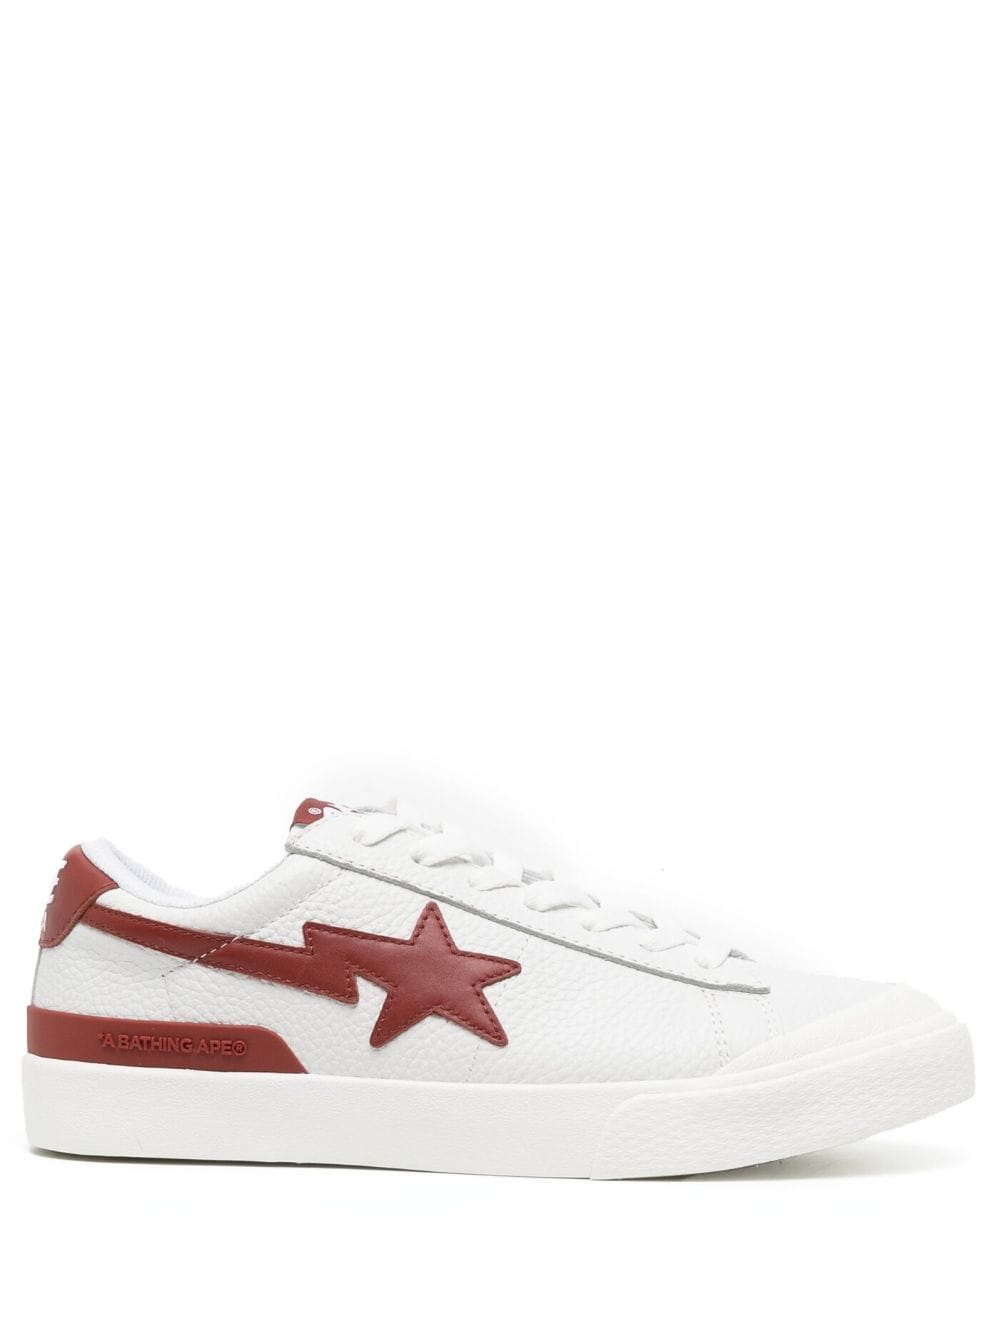 A BATHING APE® Mad Sta #2 M1 sneakers - White